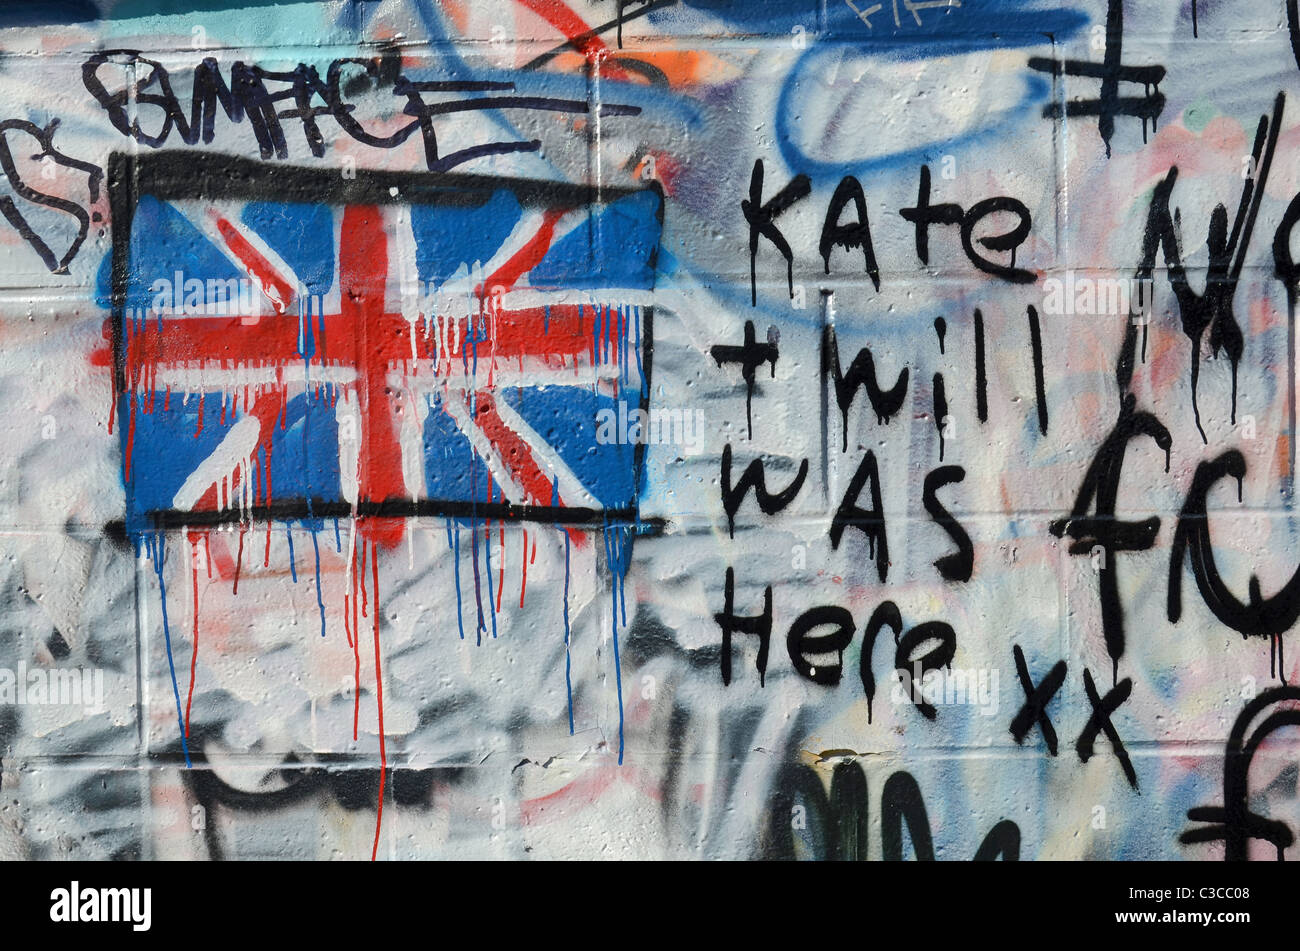 Graffiti featuring a Union Jack flag at the time of the royal wedding of William and Kate. Stock Photo